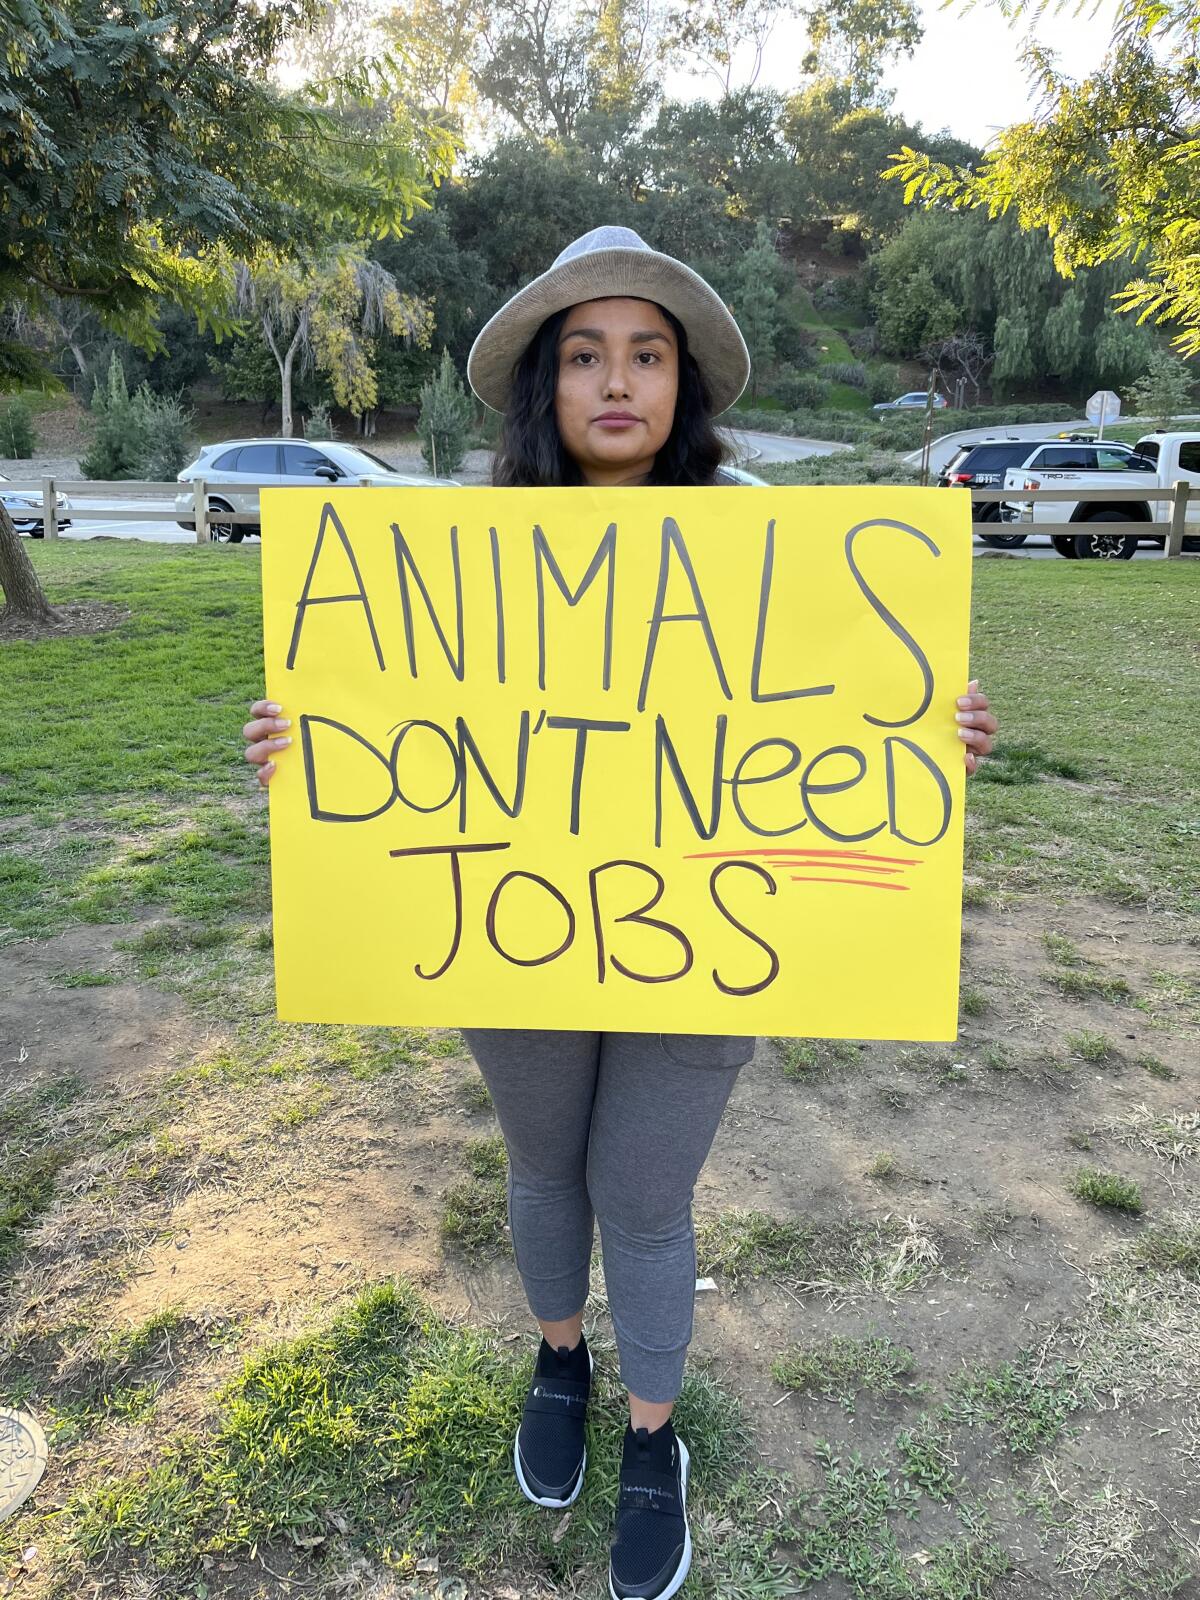 A woman holds a yellow sign that reads "Animals don't need jobs"